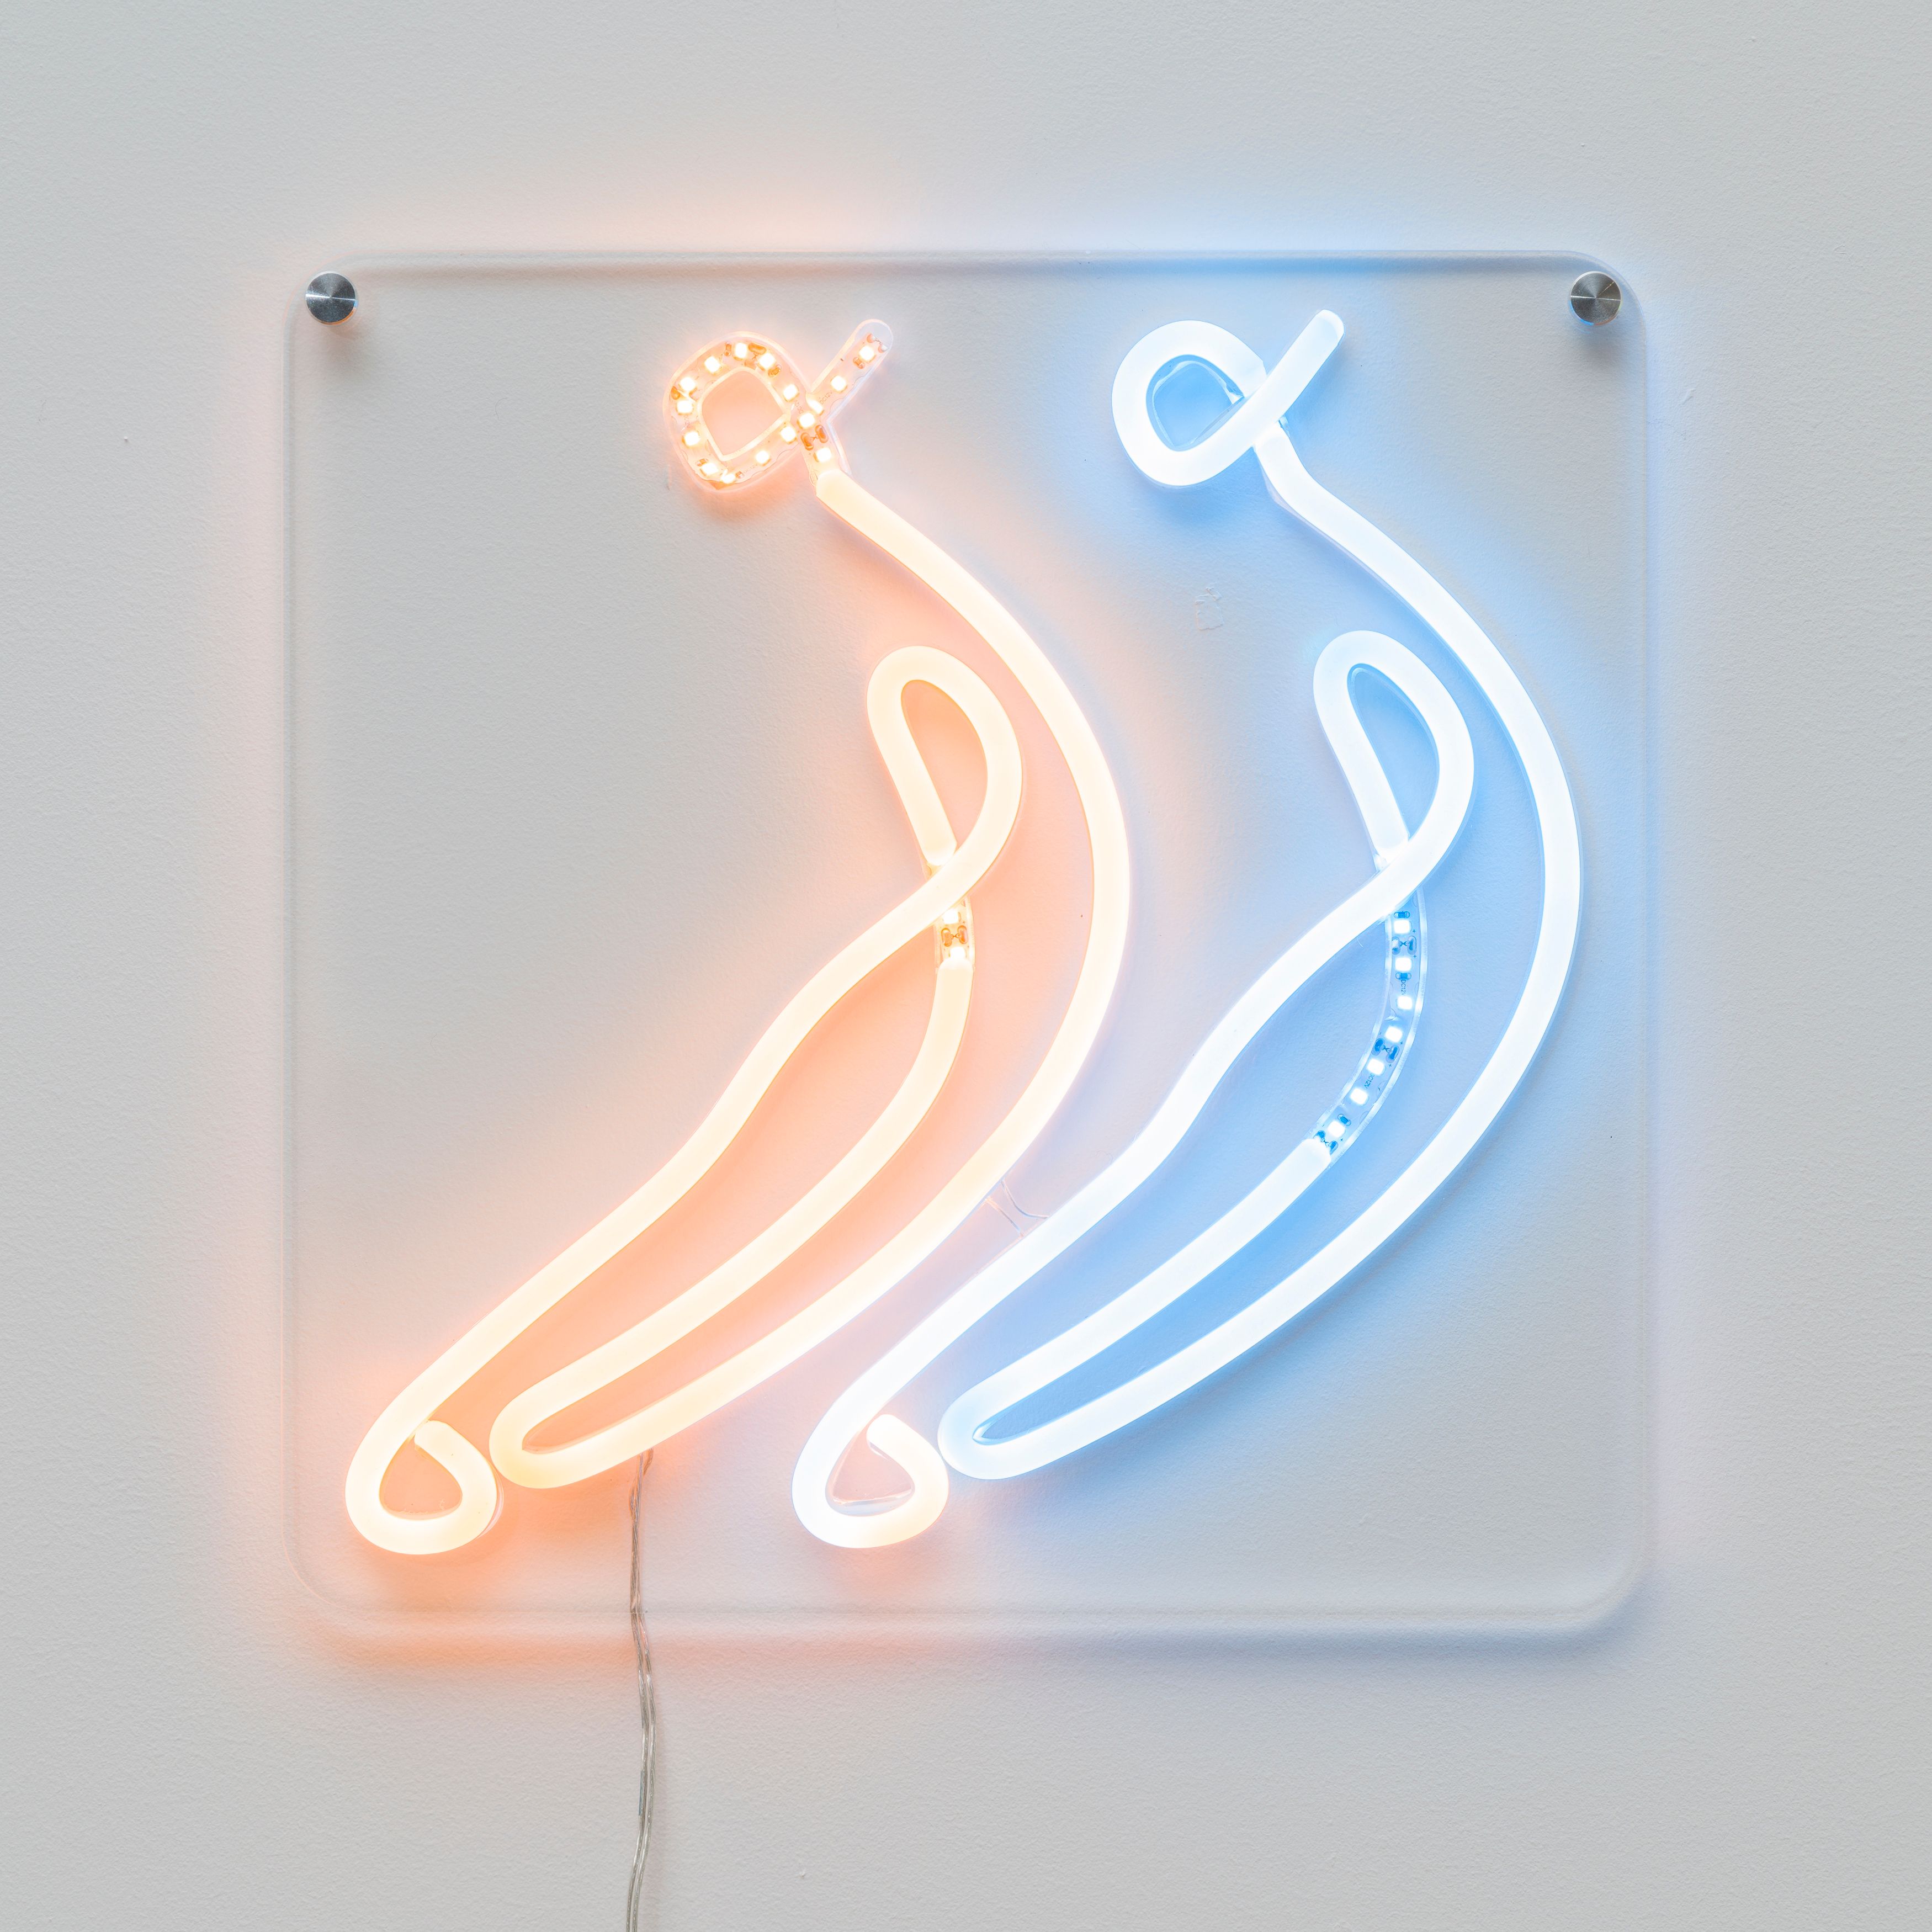 Choey Eun Young Cho, Bananananana (banana18), 2022, CNC engraved plexiglass, LED strip lights, connection wires, silicone tubes, 12 x 12 in. (30.48 x 30.48 cm)